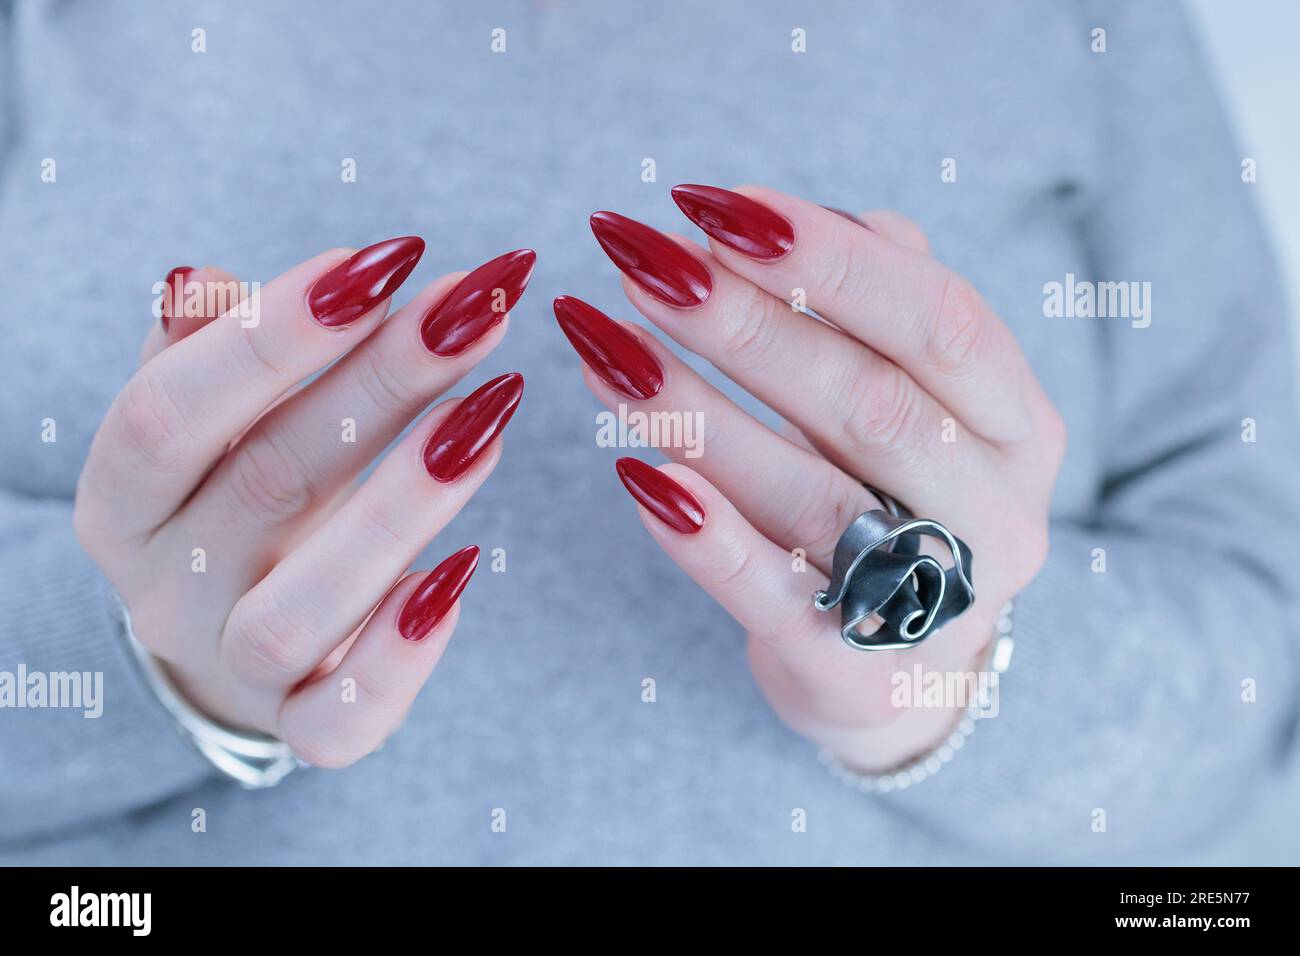 Woman hand with long nails and a bottle of dark red burgundy nail polish  Stock Photo - Alamy